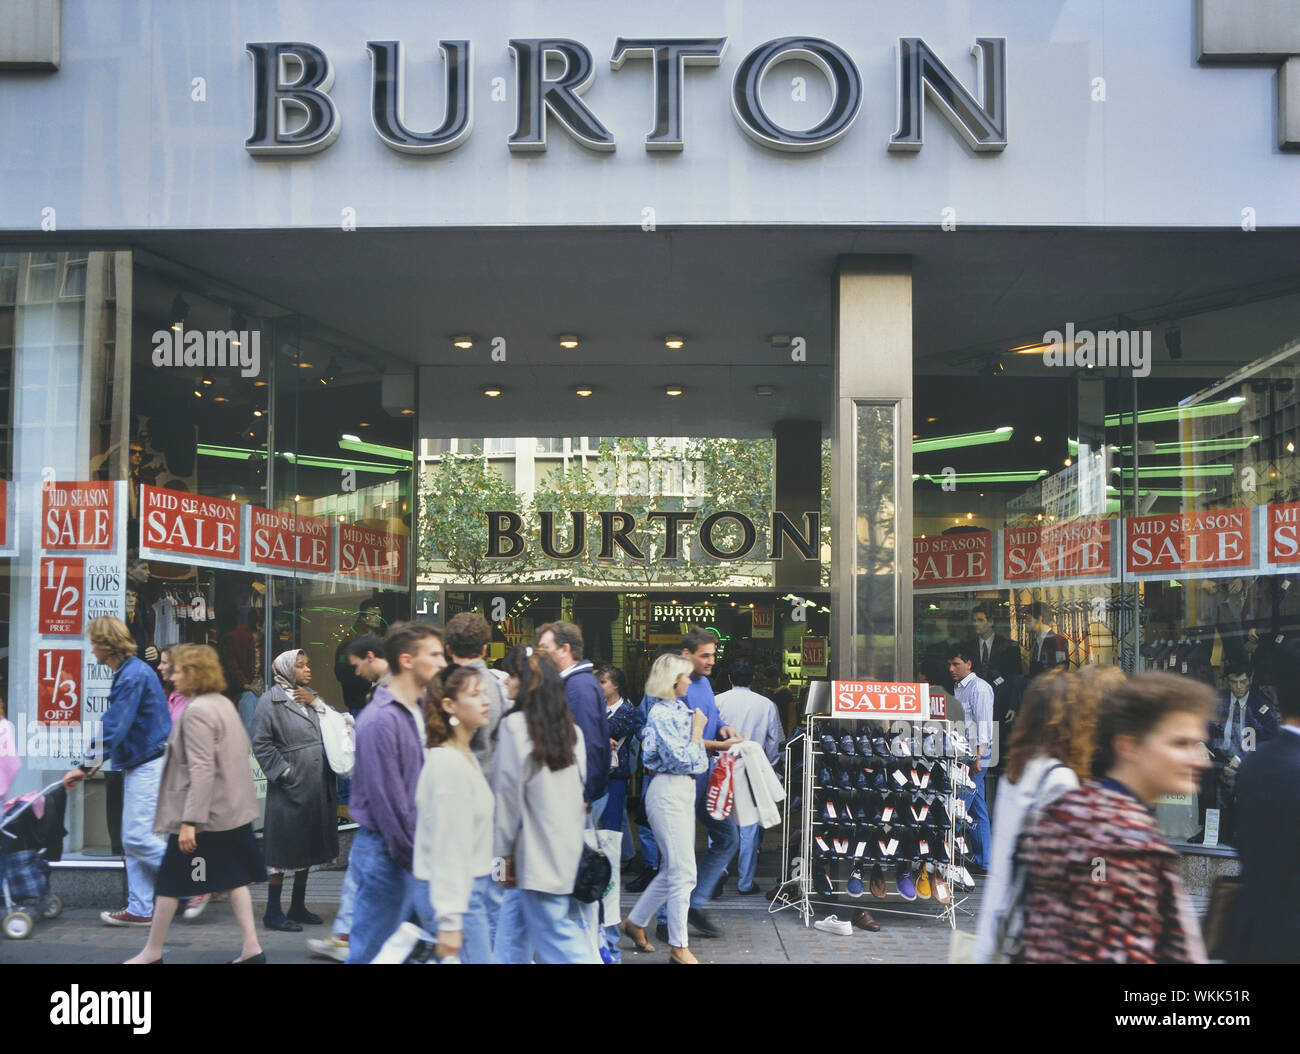 Burton Clothing Shop High Resolution Stock Photography and Images - Alamy